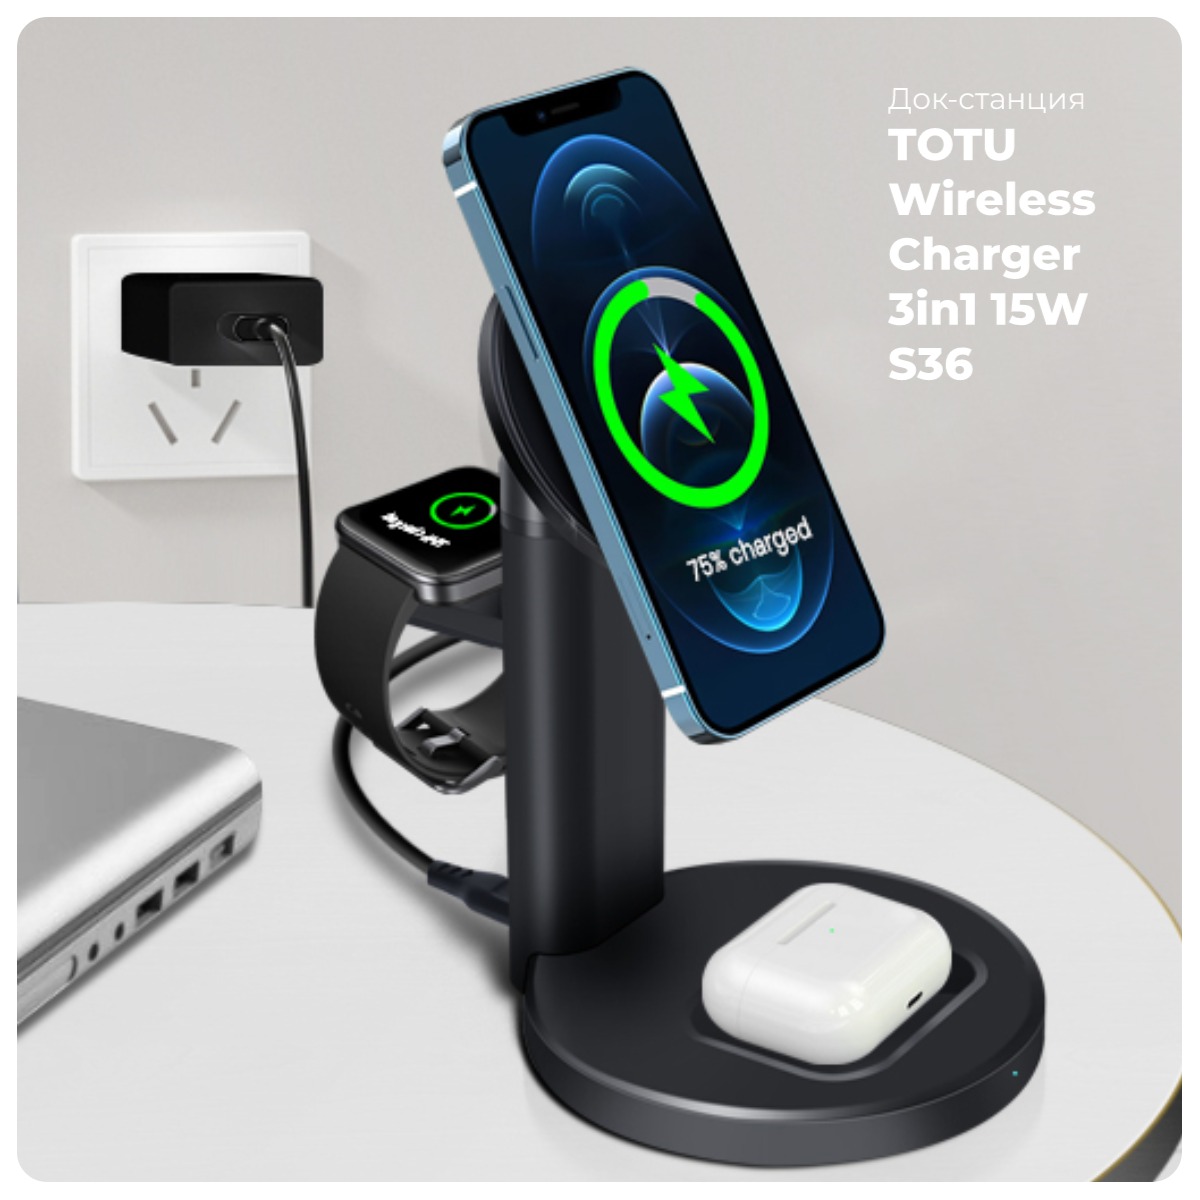 TOTU-Wireless-Charger-3-in-1-15W-S36-01